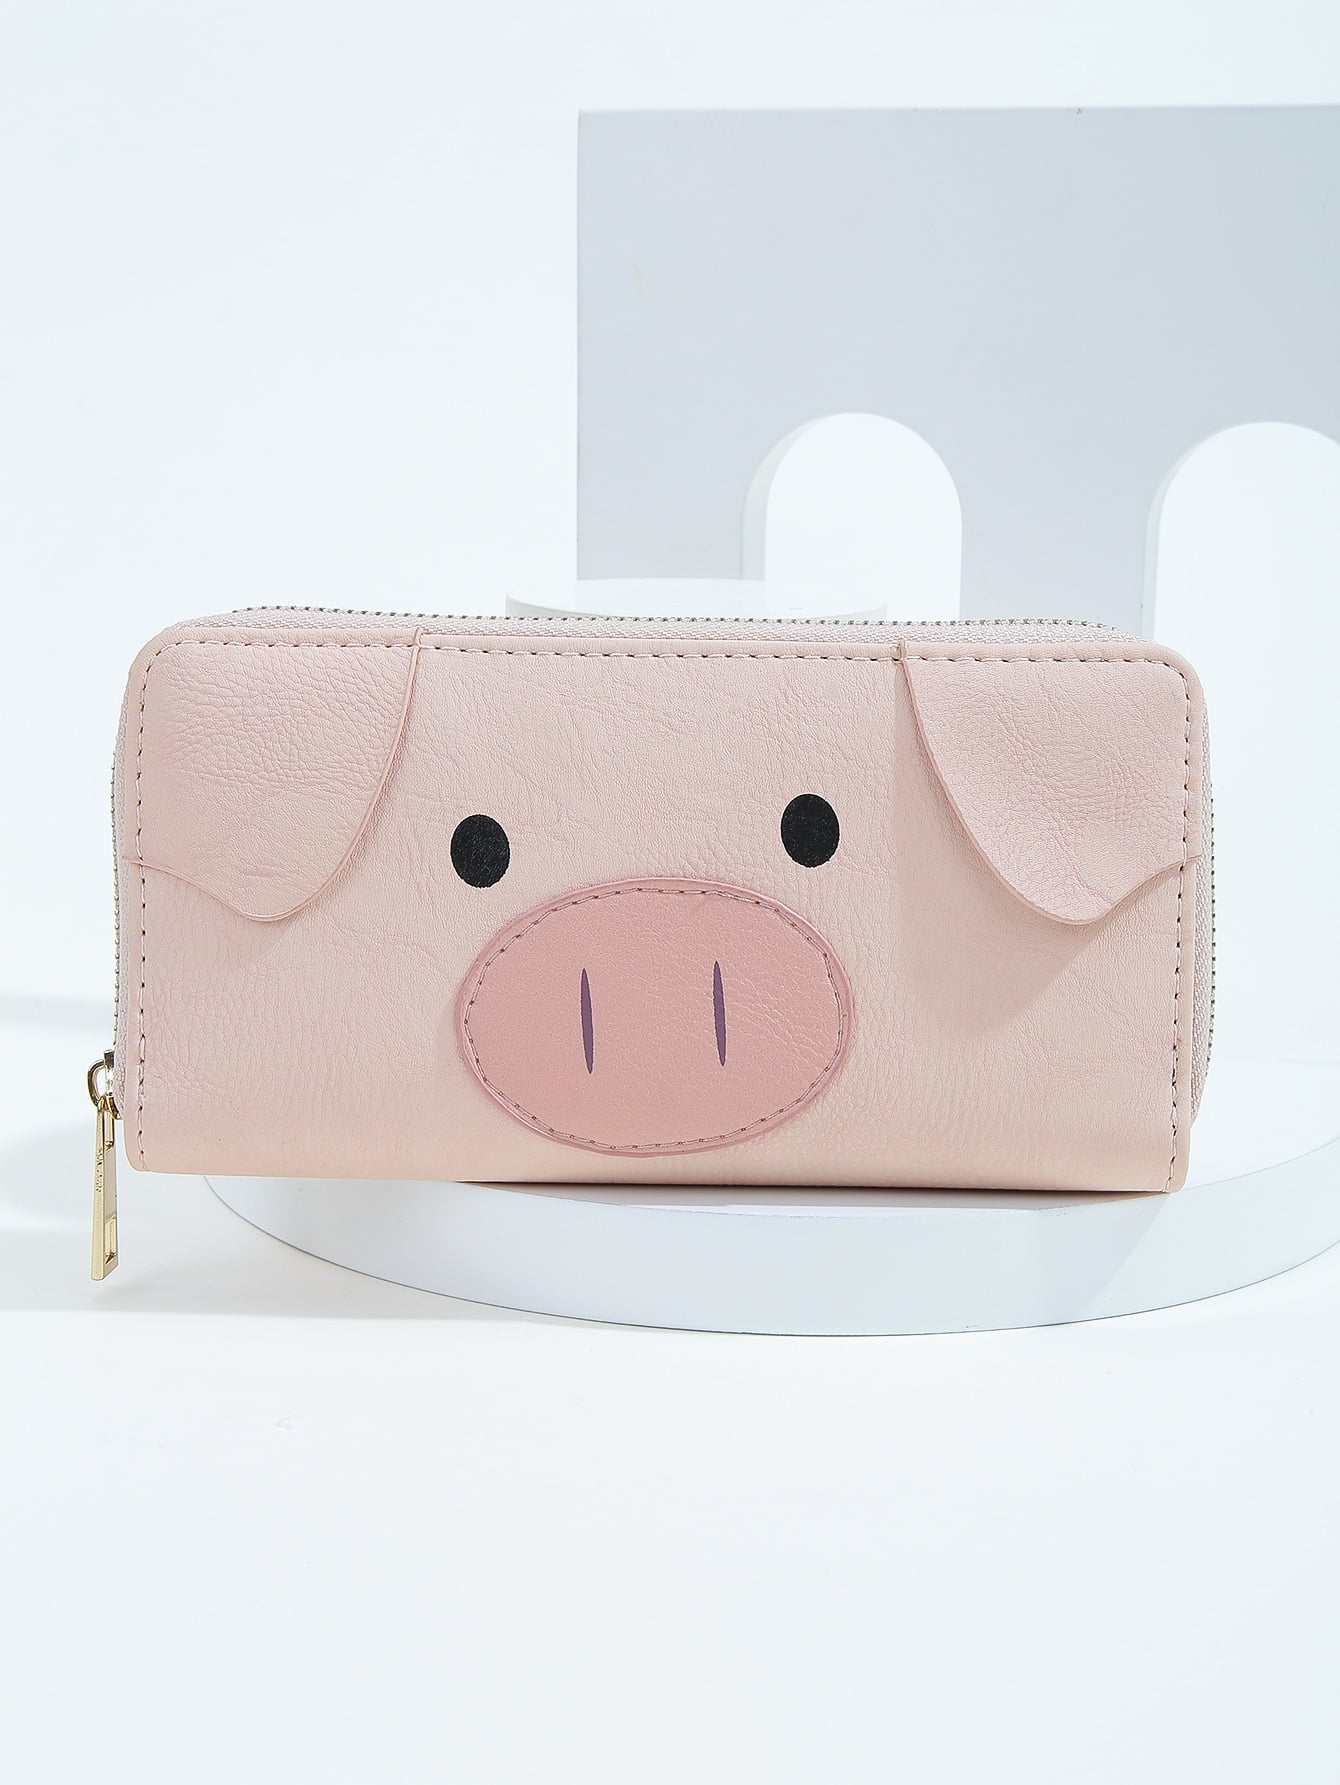 Pig and Heart Pattern Wallet Coin Purse Canvas Zipper Money Card for Birthday